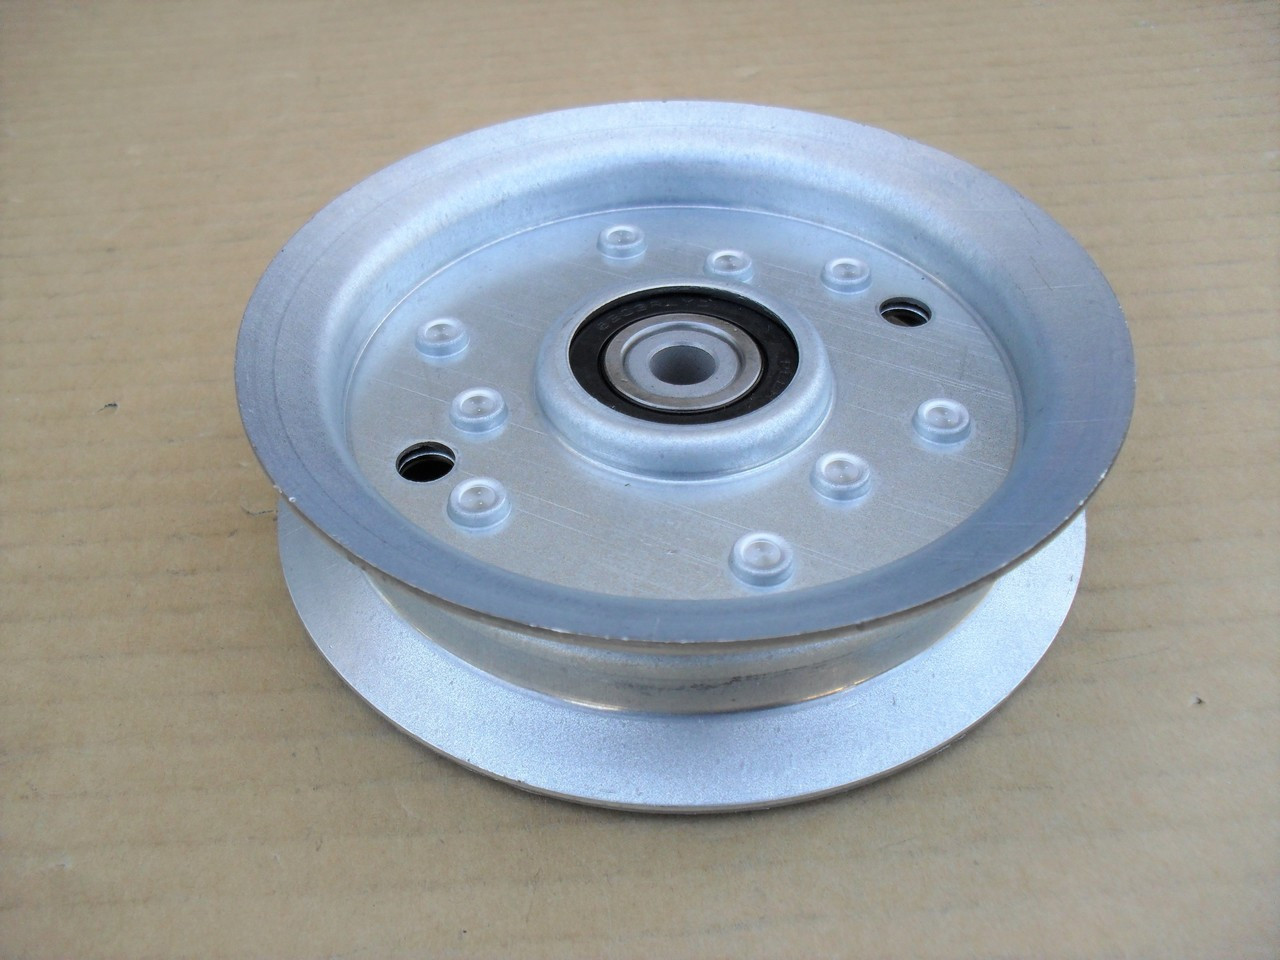 Idler Pulley for Snapper 18585, 76500, 7076500, 7076688, 1-8585, 7-6500